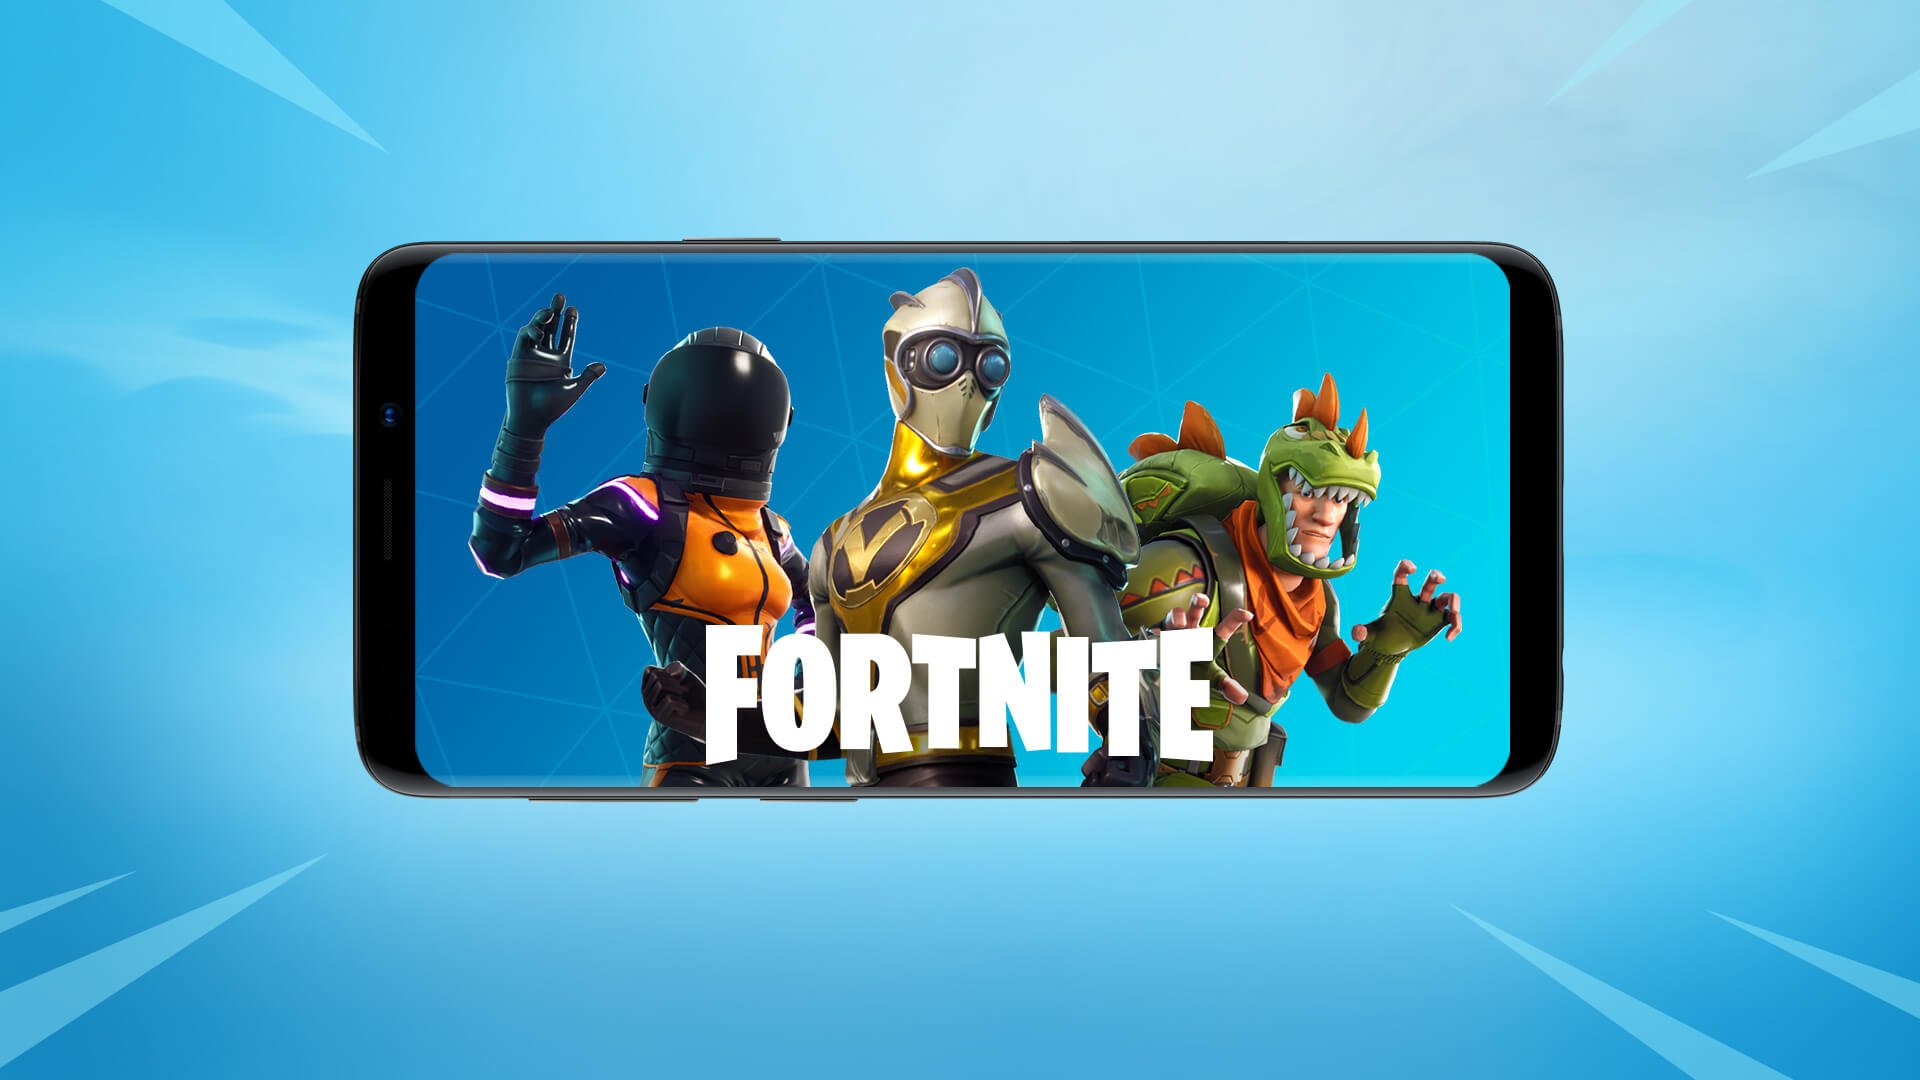 How To Download Fortnite On Mobile